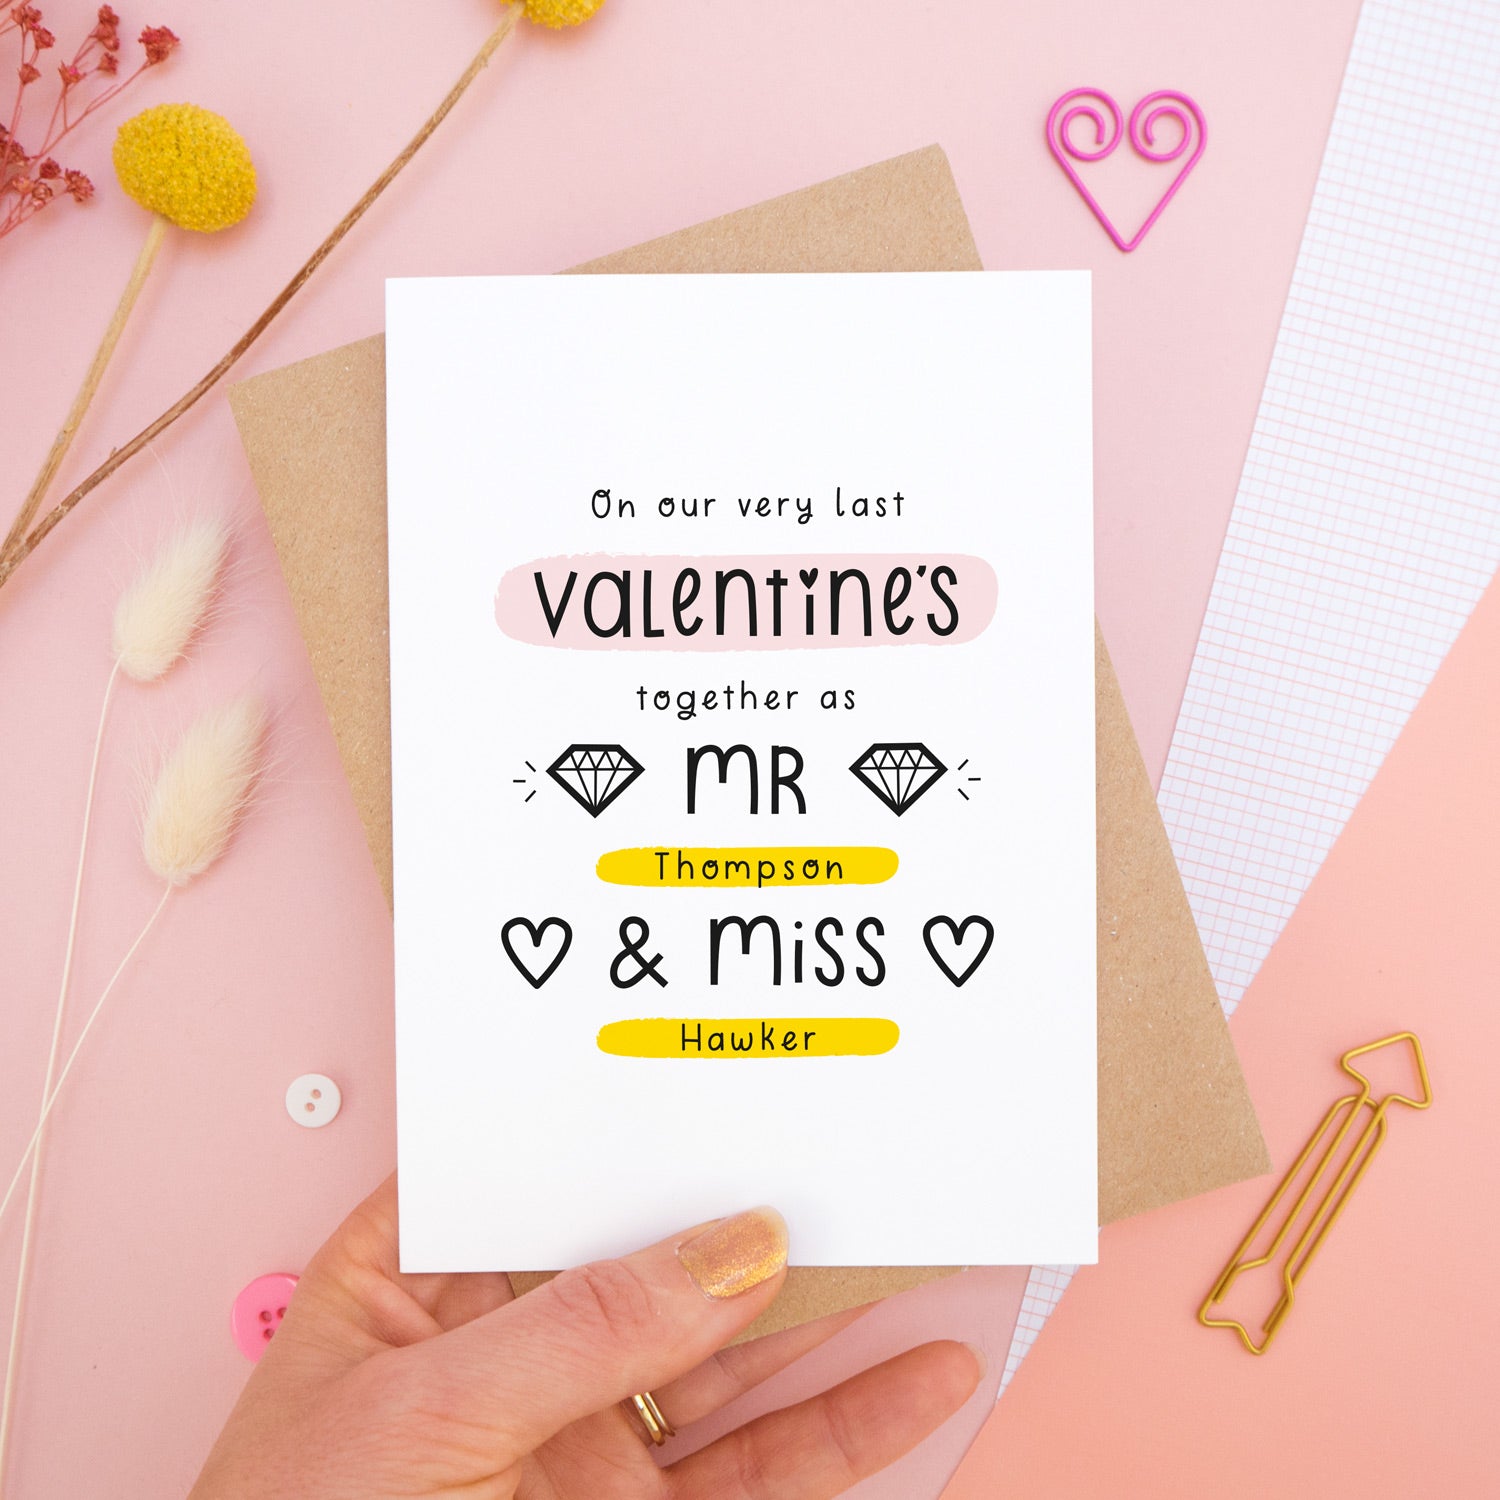 A personalised last anniversary or Valentine’s card photographed on a pink background with floral props, paper clips, and buttons. This image shows the last valentine’s option with the Mr & Miss wording. The text is black and there are pops of yellow and pink behind key words.